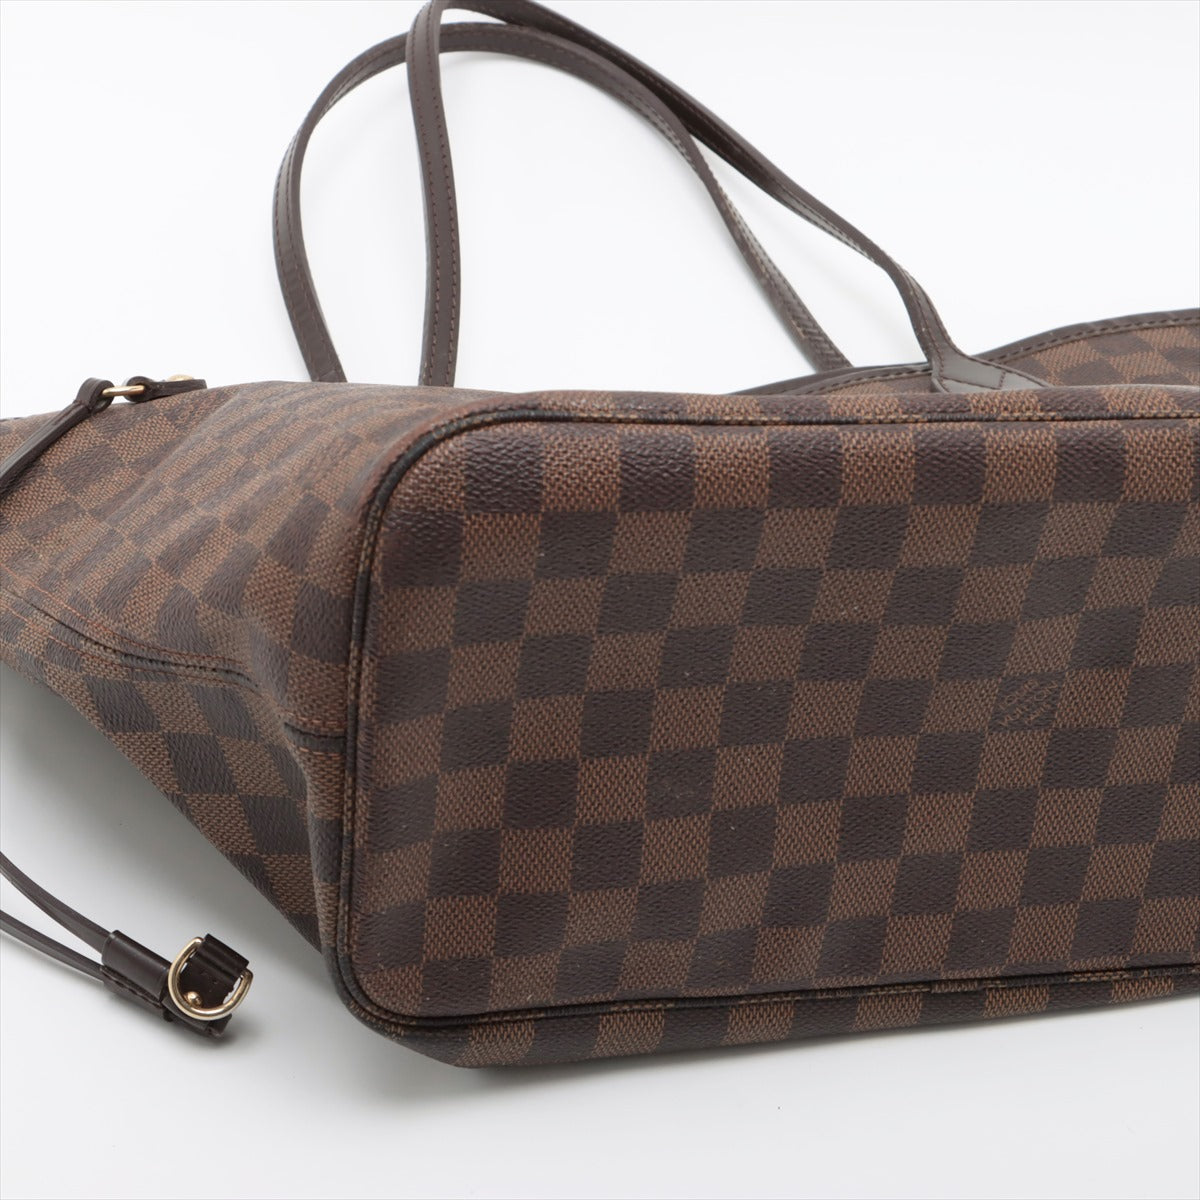 LOUIS VUITTON Neverfull PM in Damier N51105 Tote